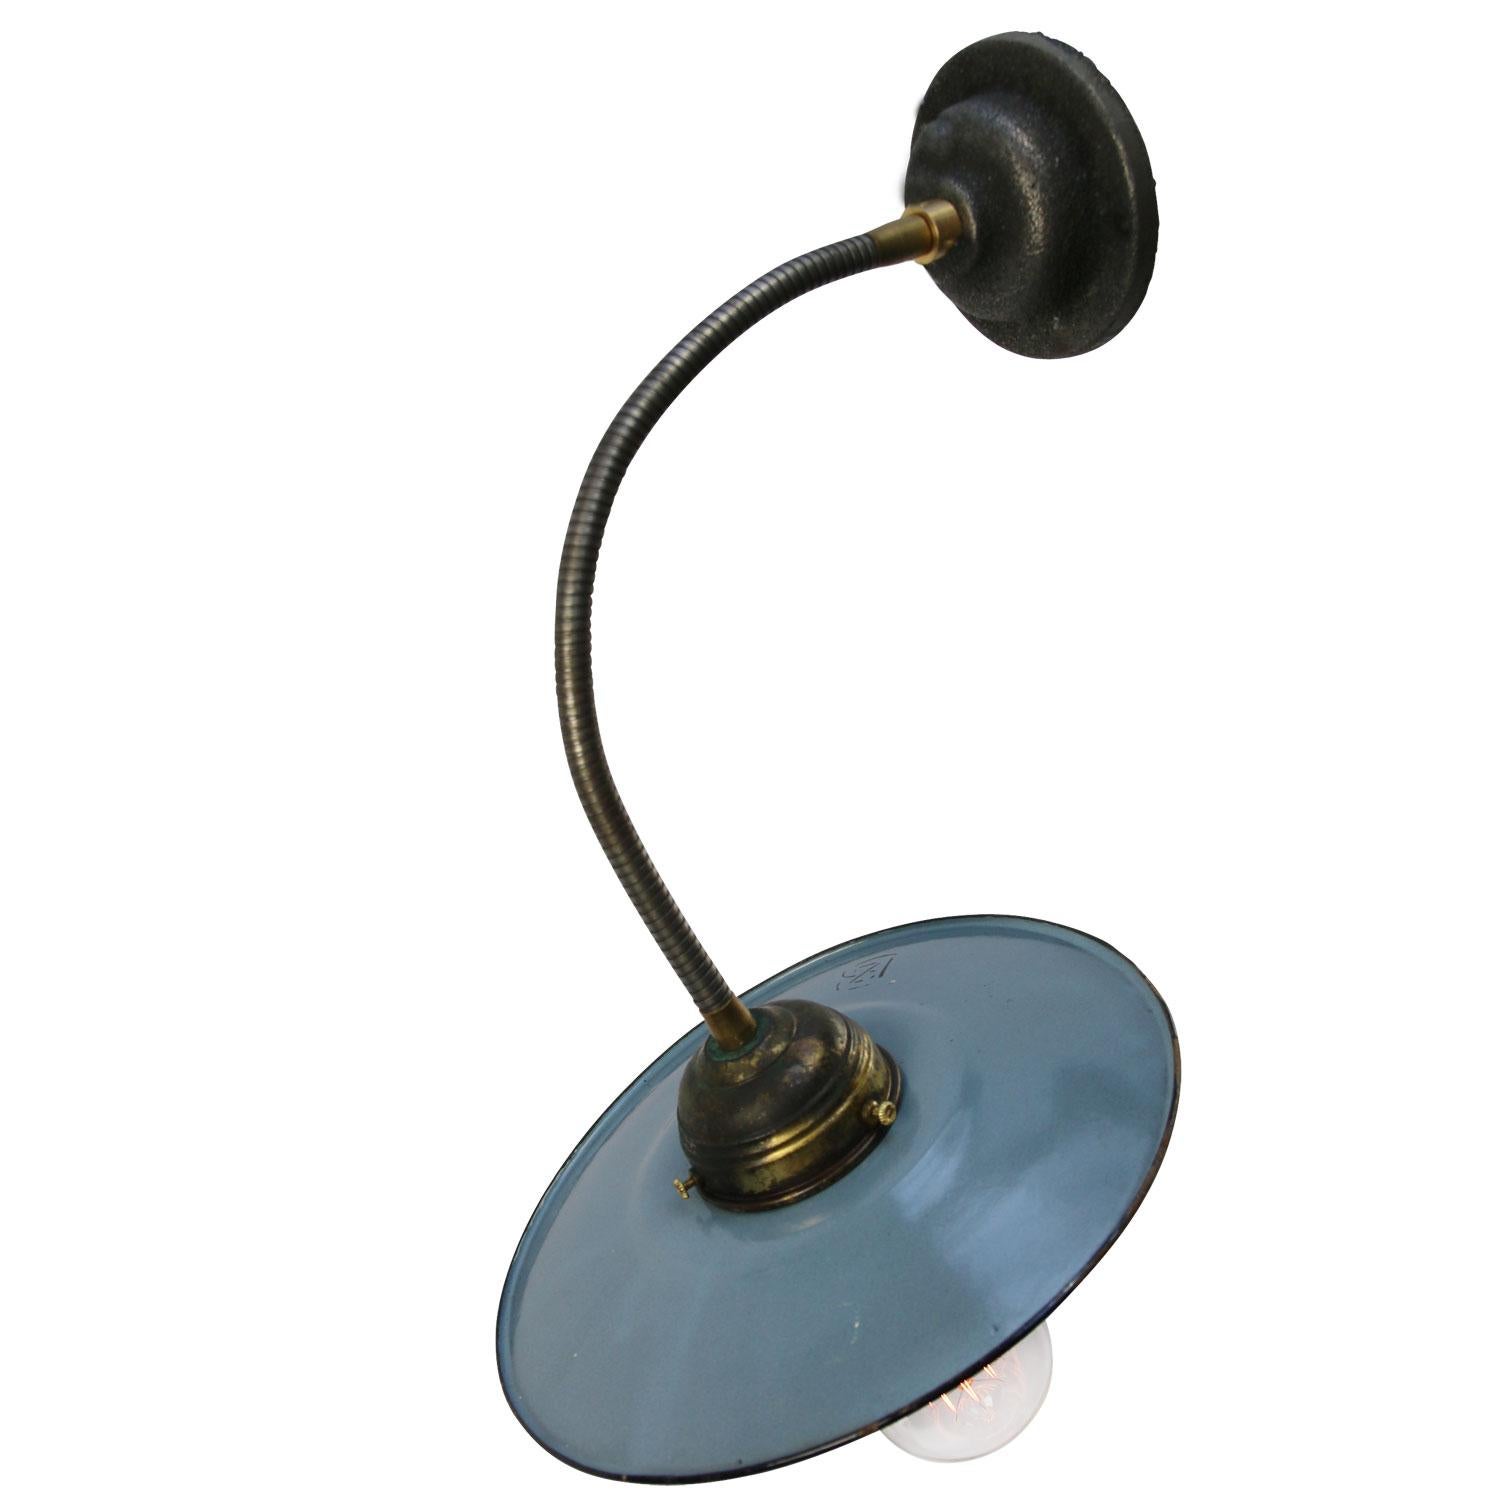 Wall light spot down lighter
Blue enamel shade.
Gooseneck arm adjustable in angle.

Diameter cast iron wall mount 10.5 cm / 4”

Weight: 1.50 kg / 3.3 lb

Priced per individual item. All lamps have been made suitable by international